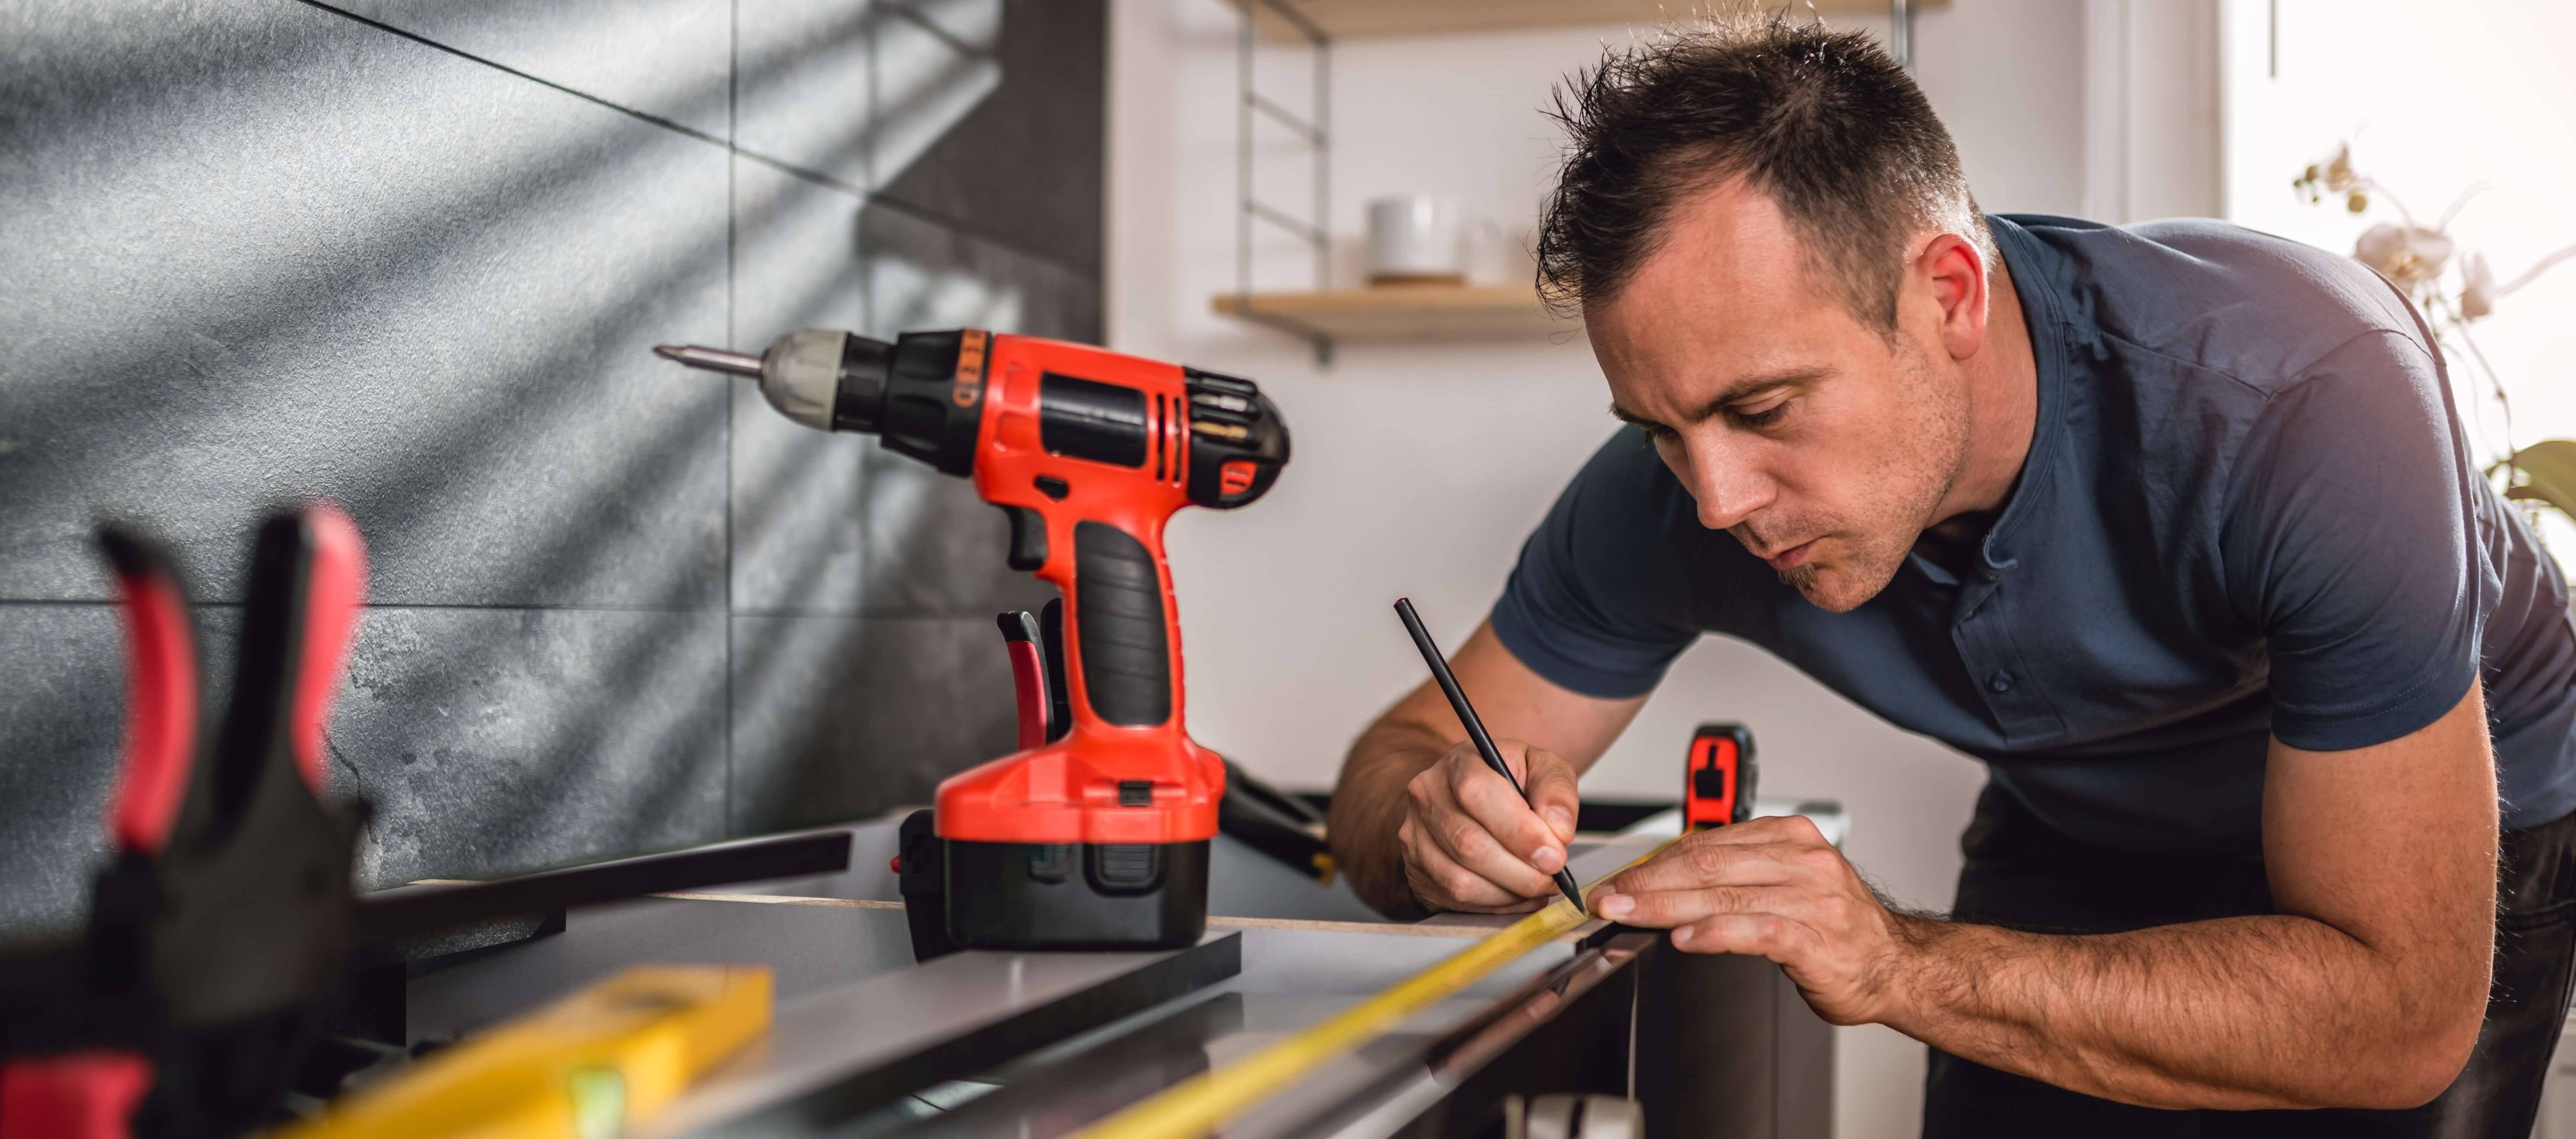 man working with tools on home improvements